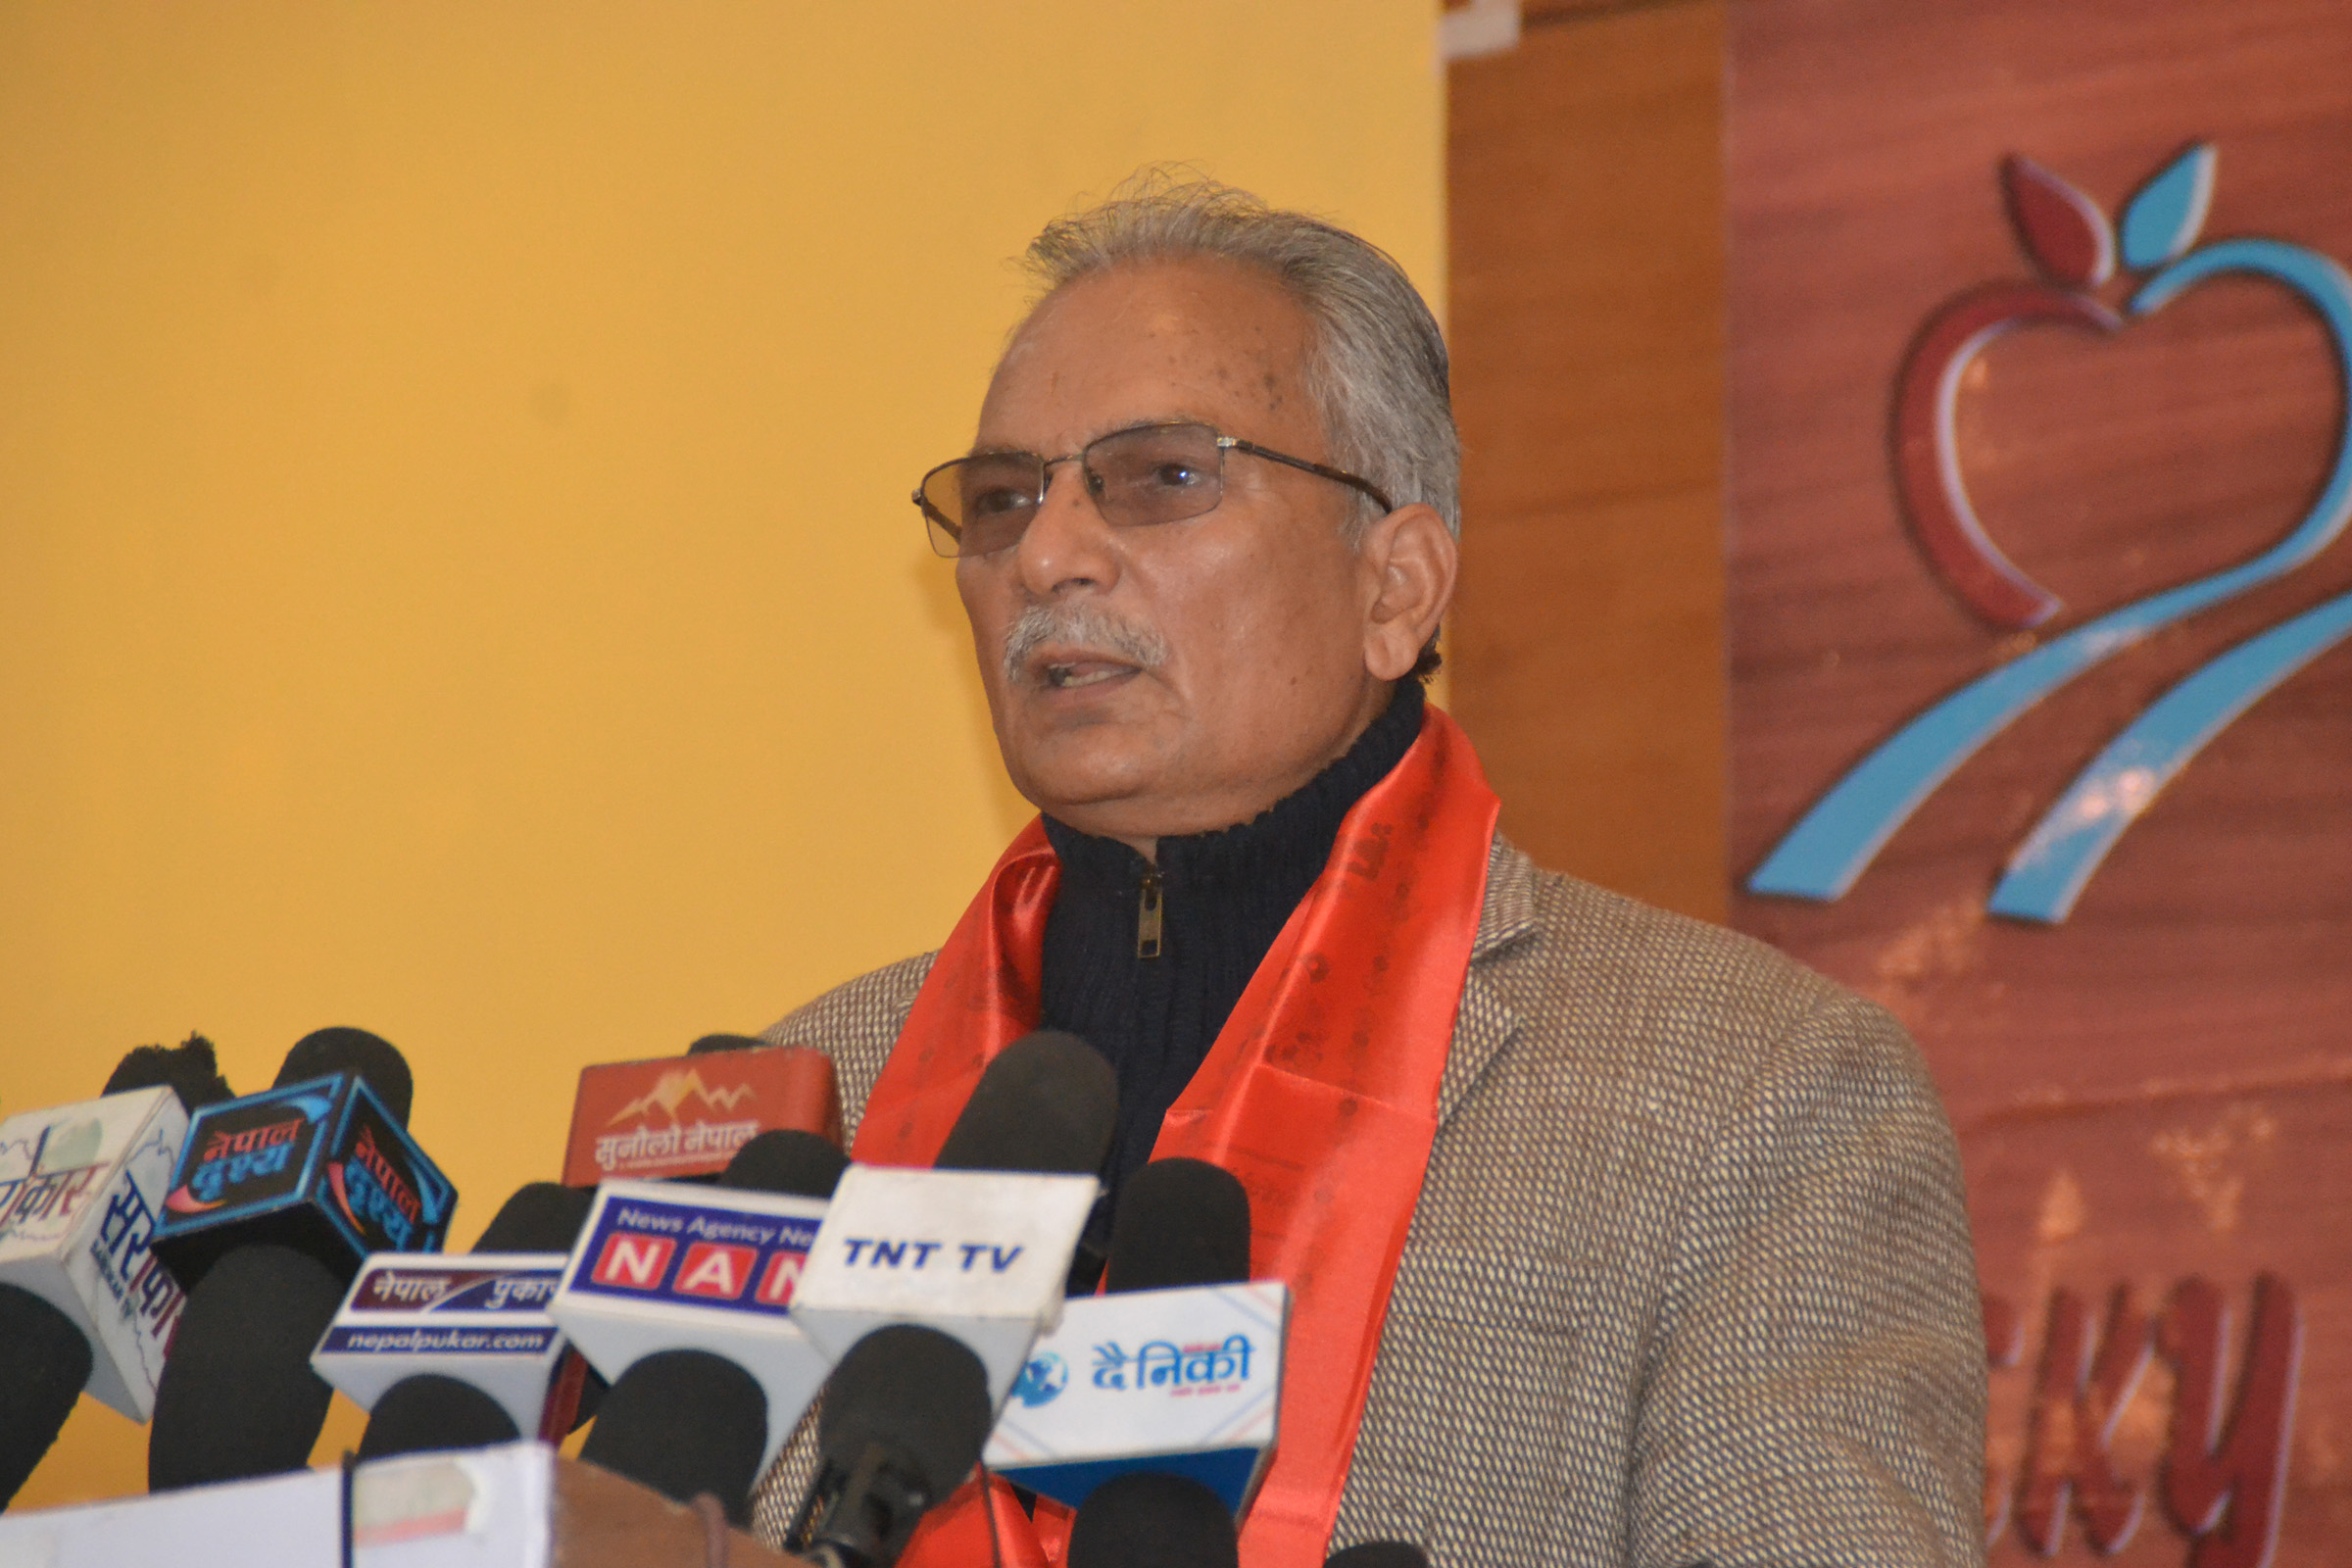 Dr. Bhattarai announces not to contest in the November 20 election